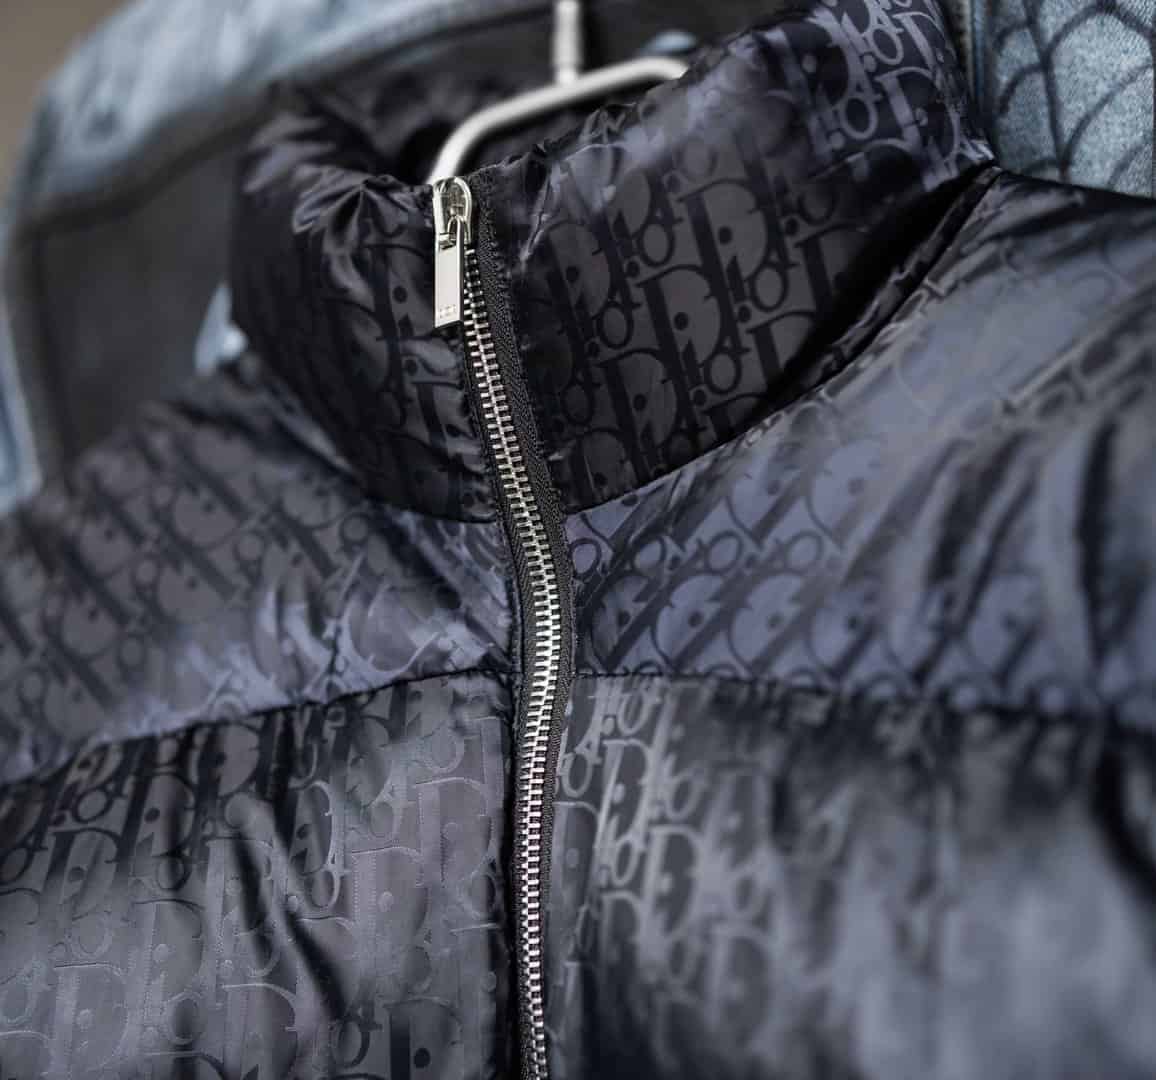 dior puffer jacket authenticity guide